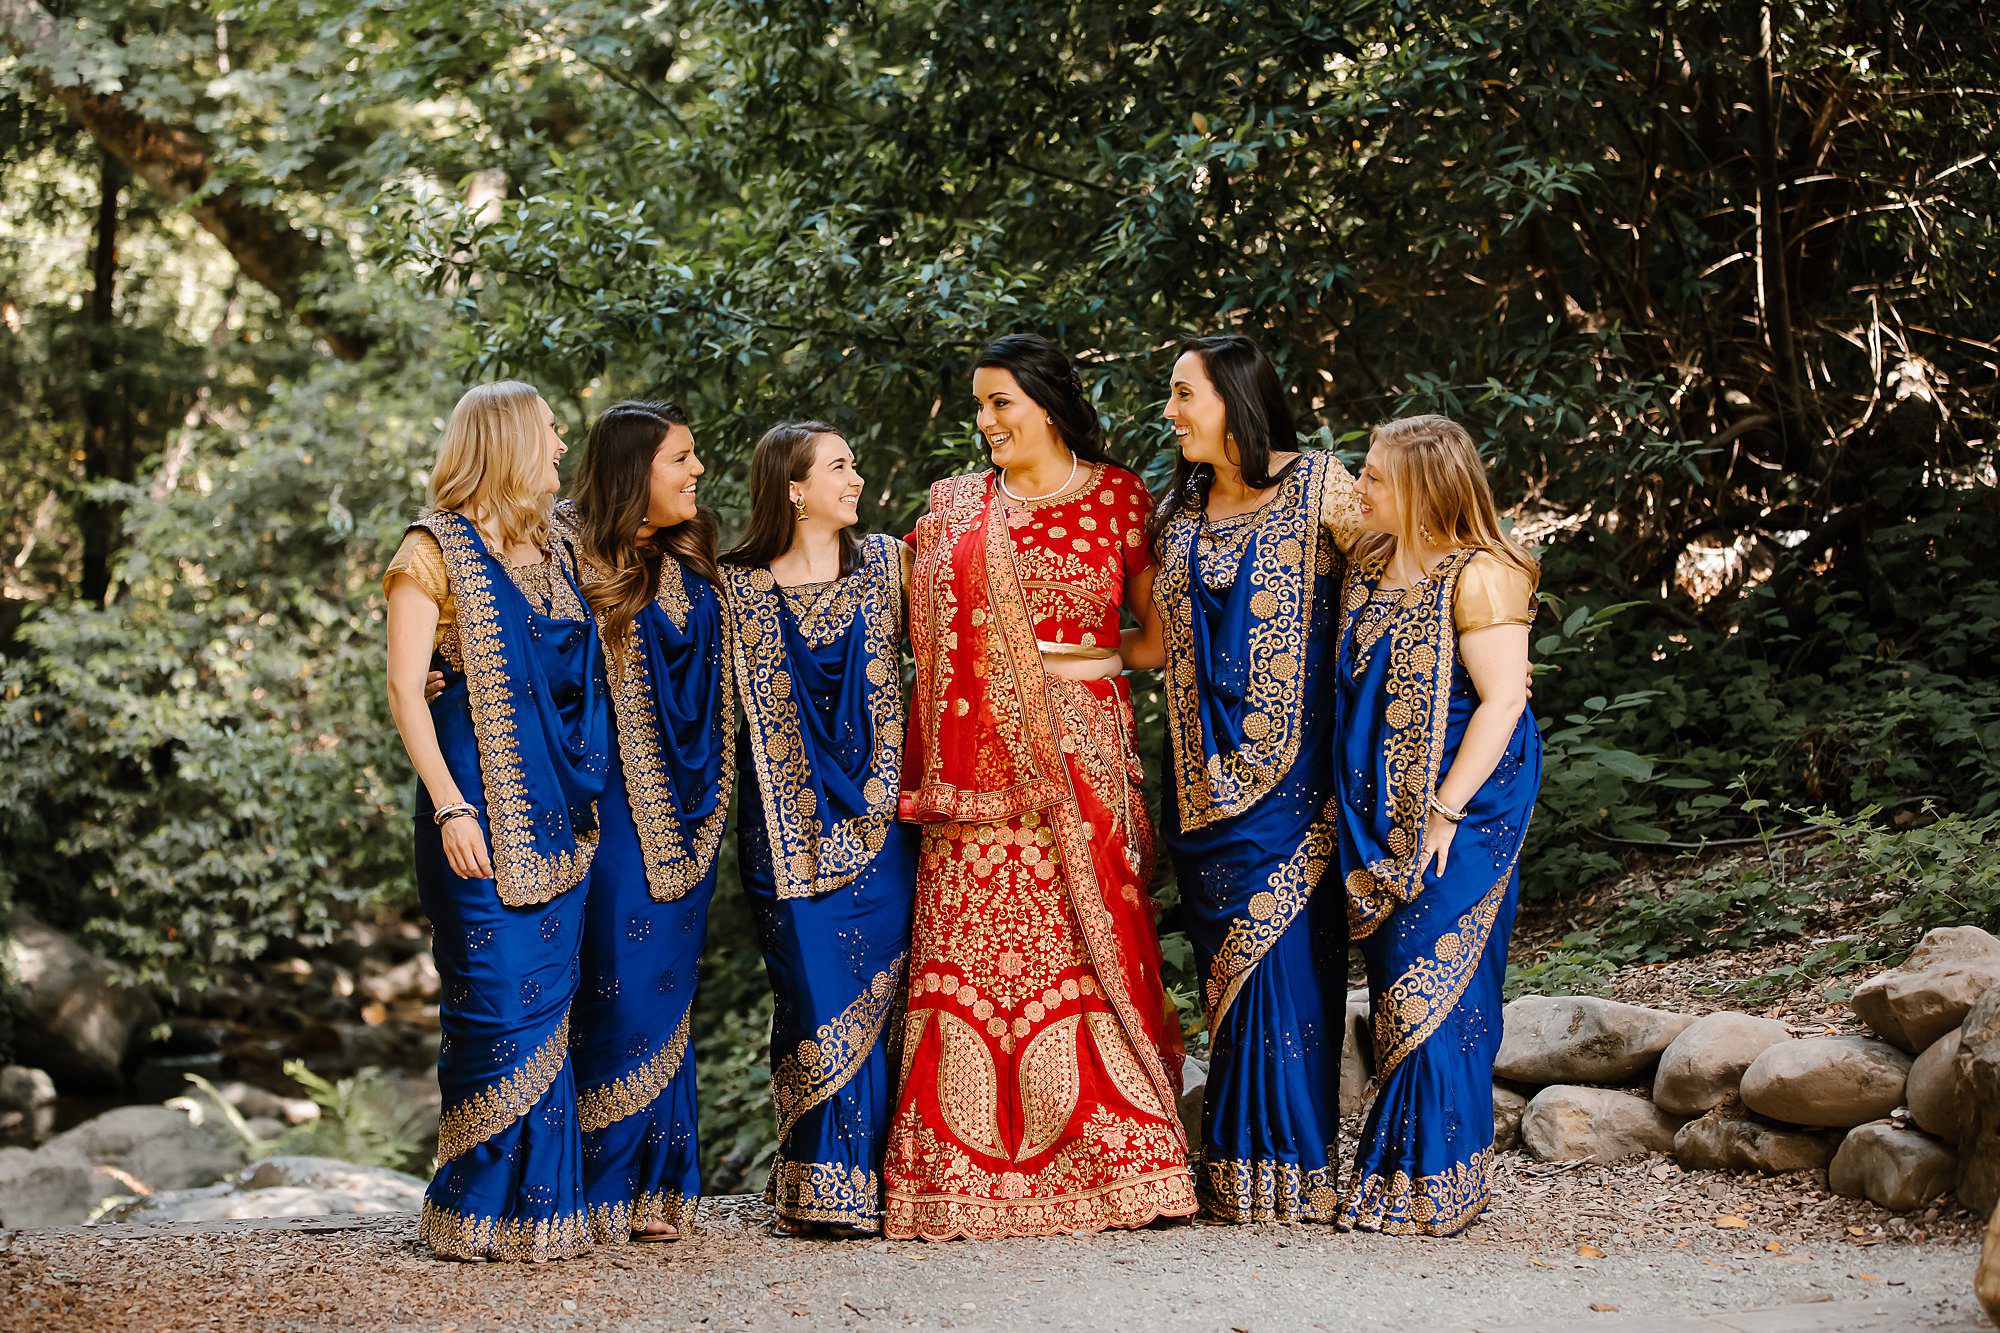 Bridal party in royal blue saree's and bride in red saree at Saratoga Springs wedding